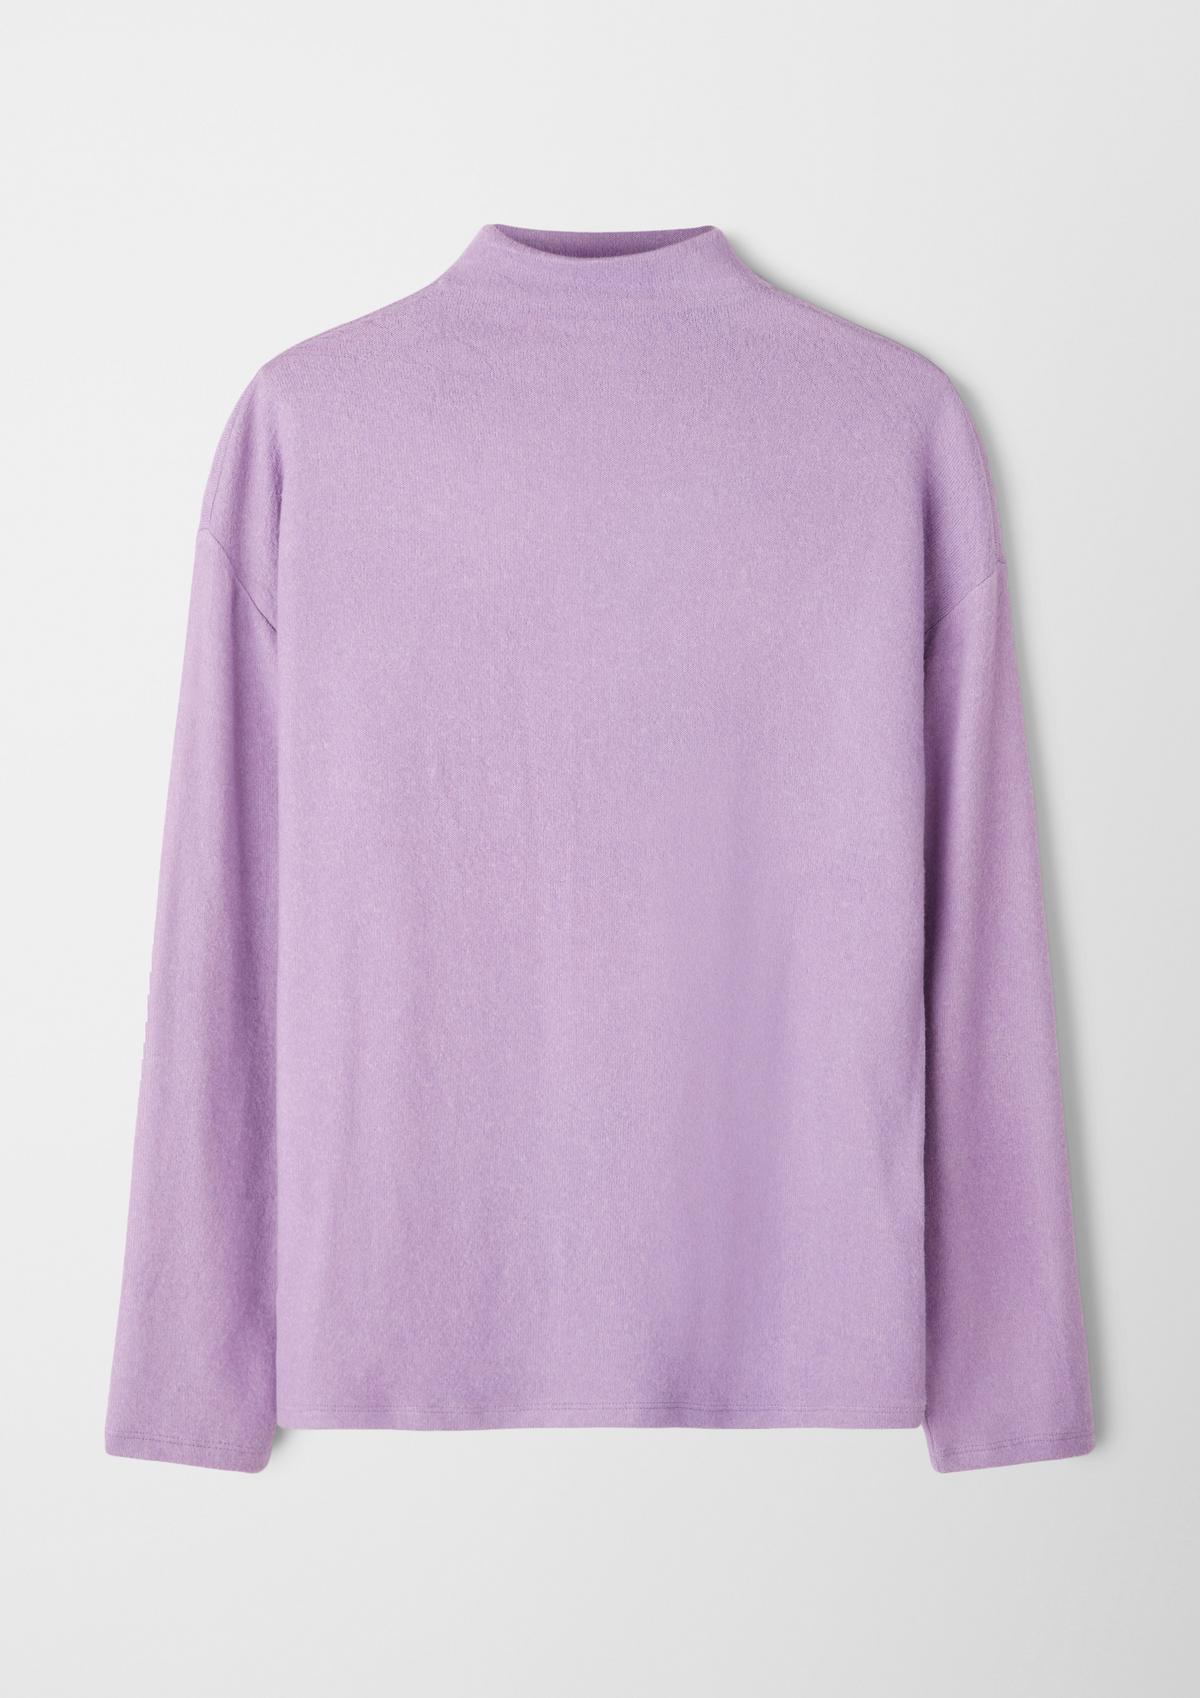 s.Oliver Long sleeve soft jersey top